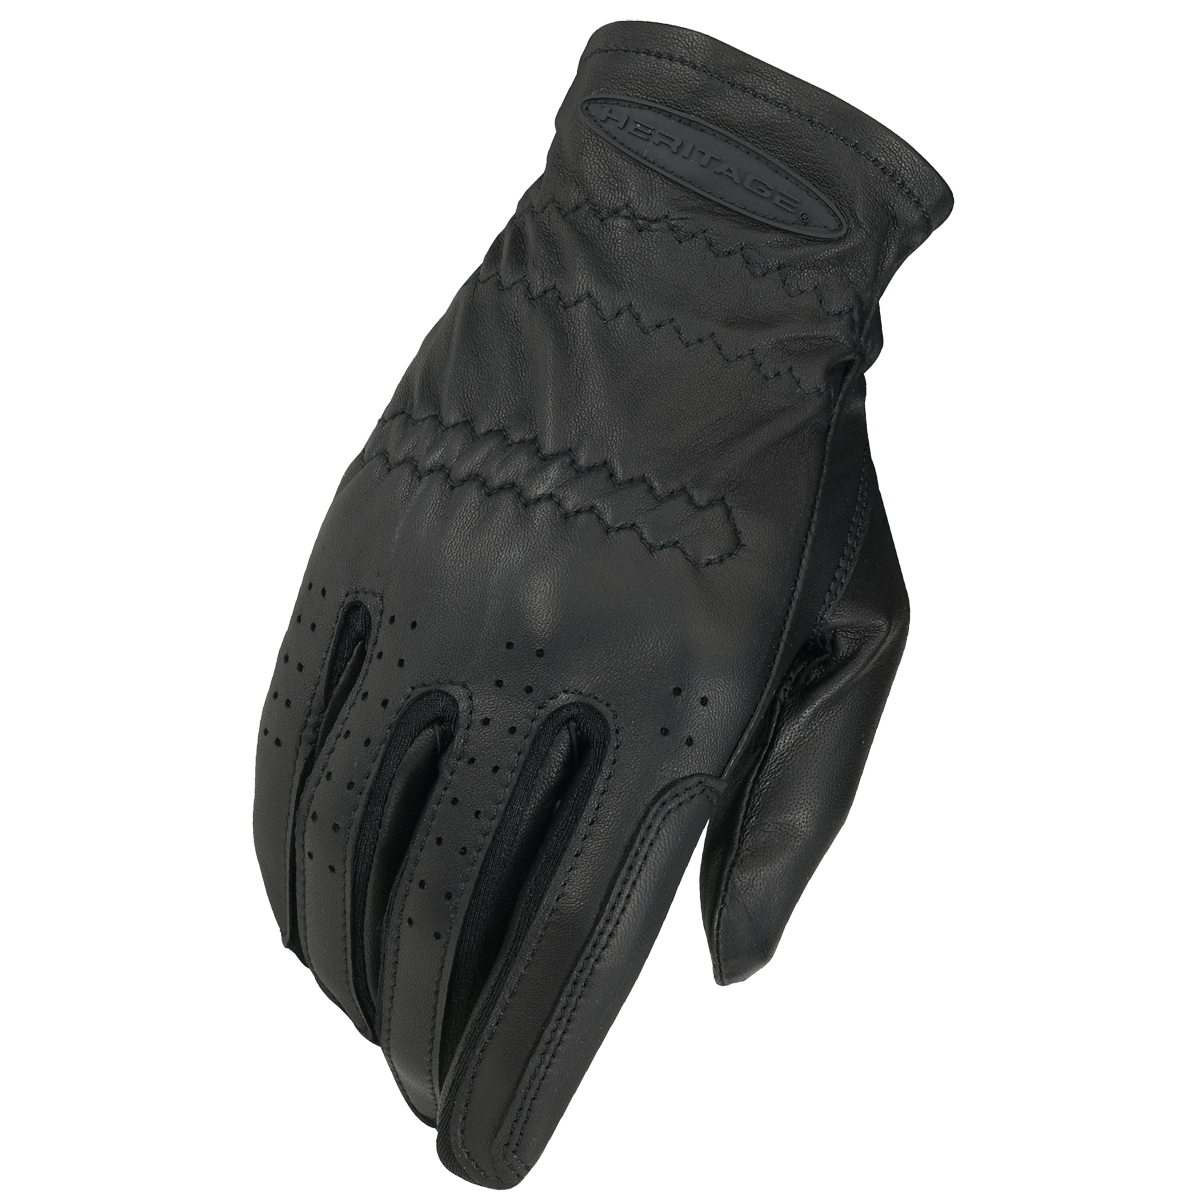 Heritage HG200 Pro-Fit Show Glove